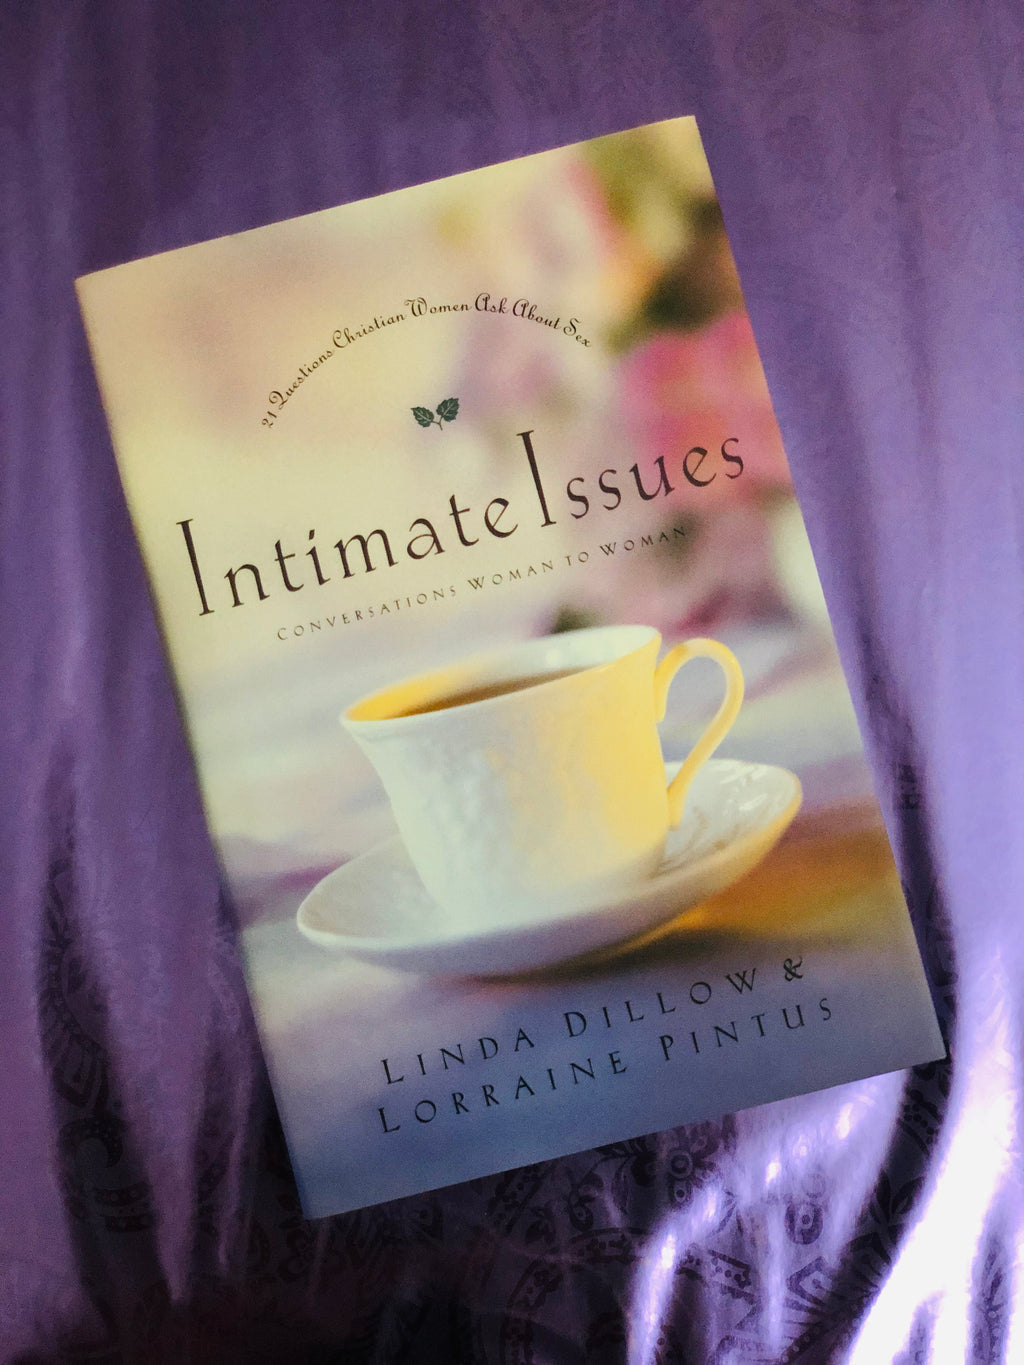 Intimate Issues- By Linda Dillow & Lorraine Pintus